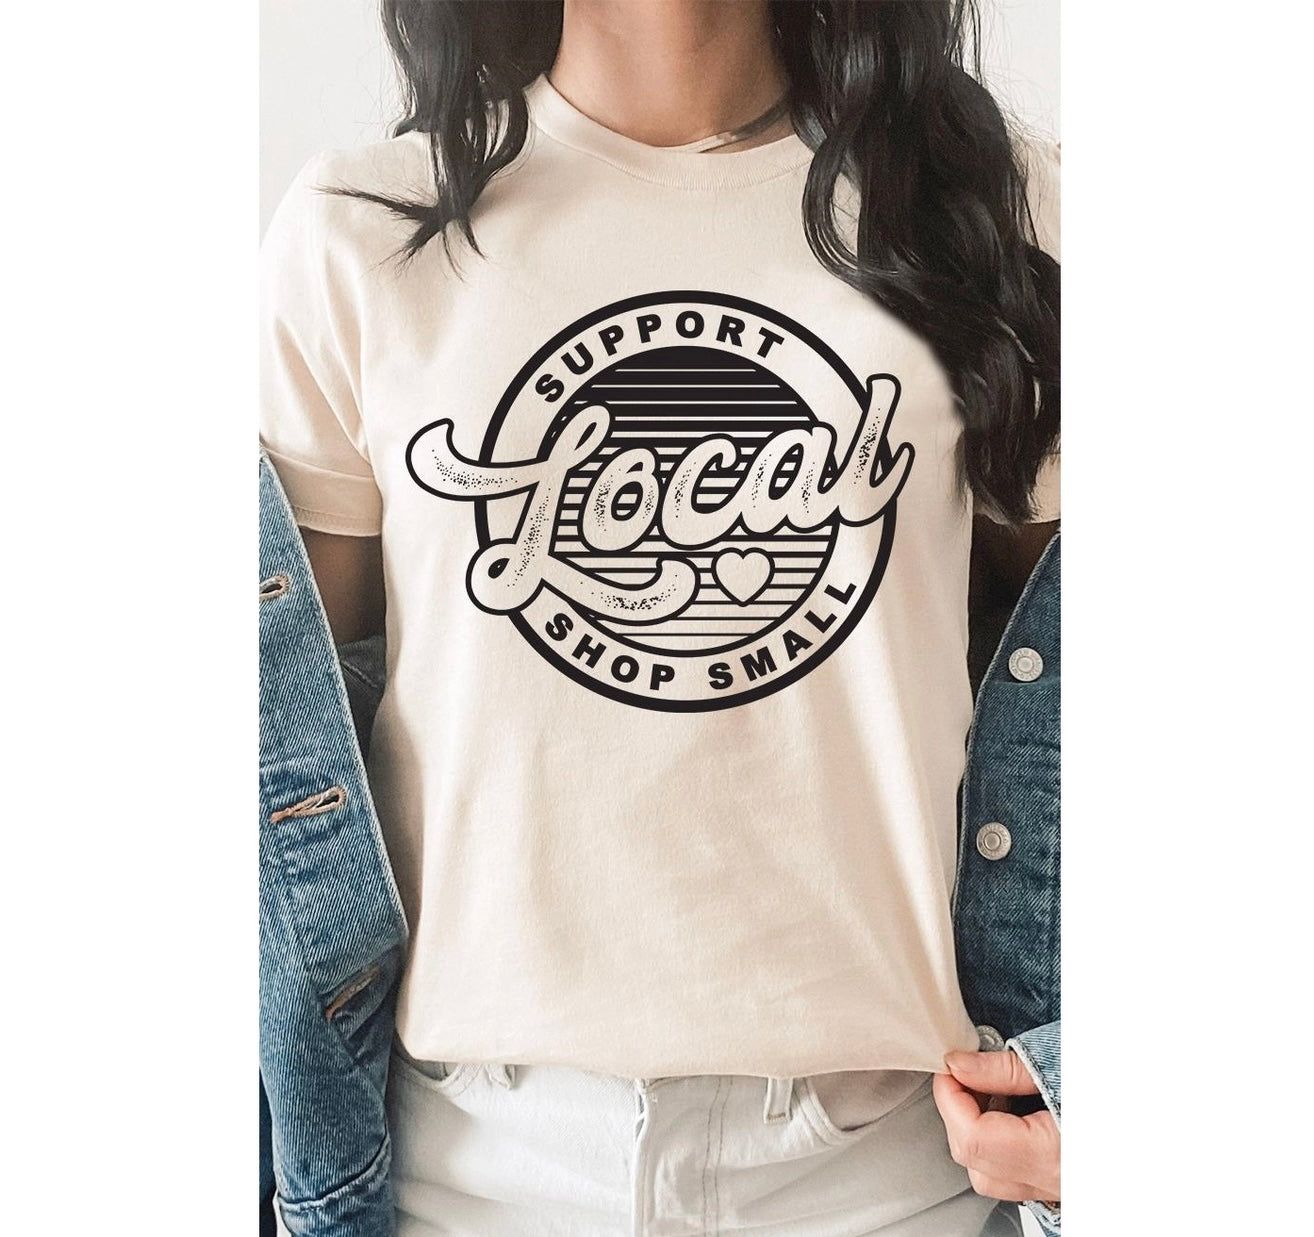 Support Local Shop Small Graphic Tee